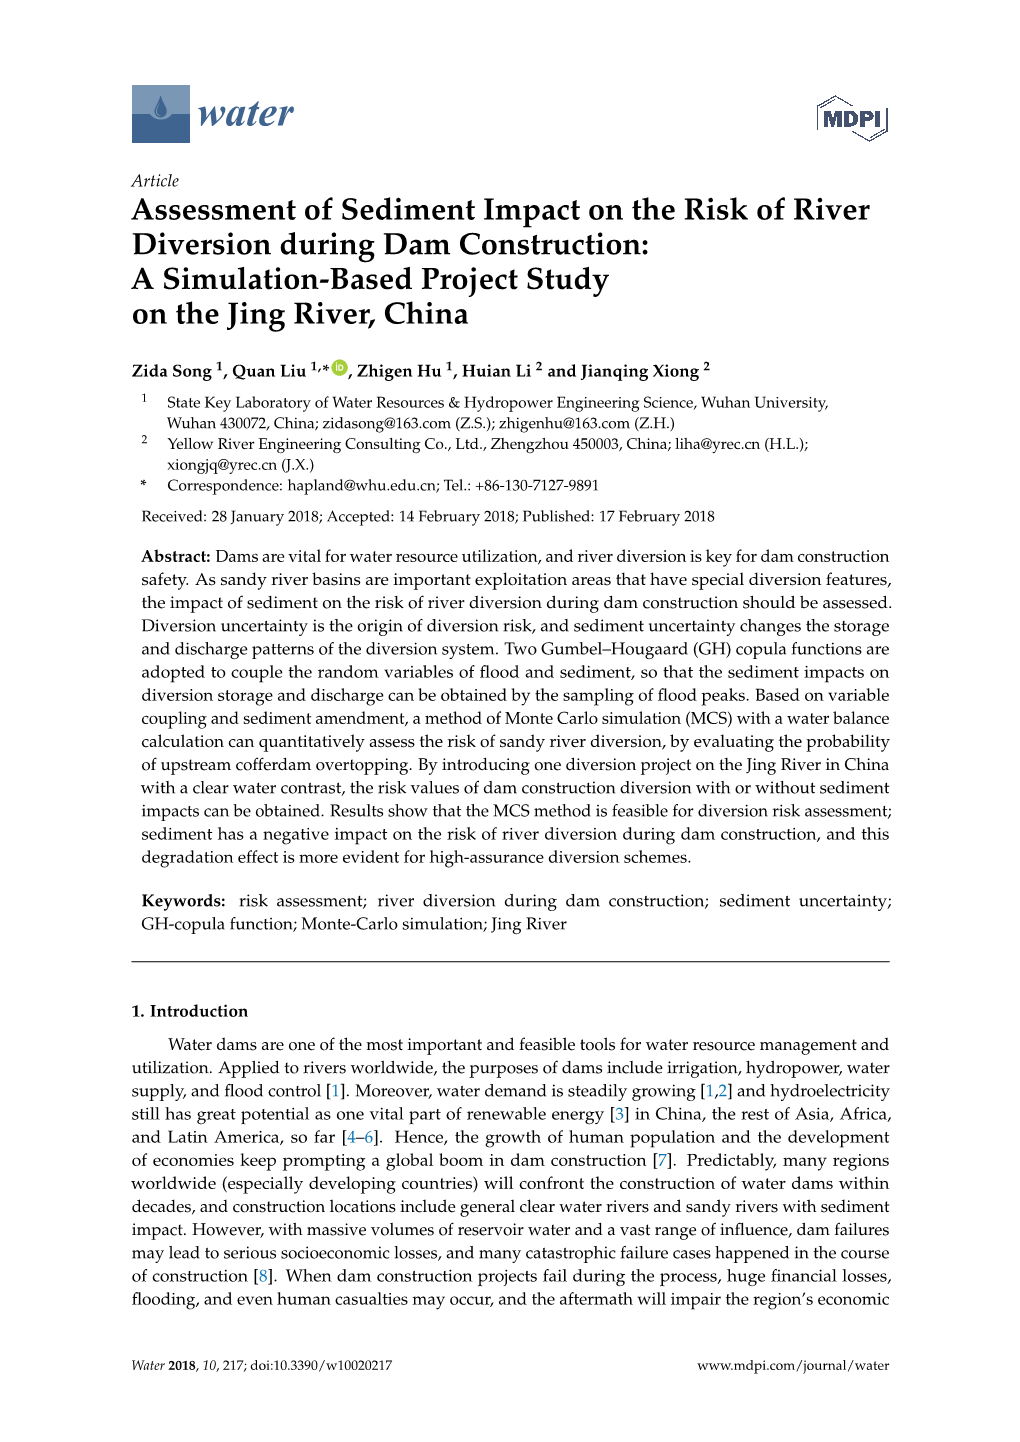 Assessment of Sediment Impact on the Risk of River Diversion During Dam Construction: a Simulation-Based Project Study on the Jing River, China